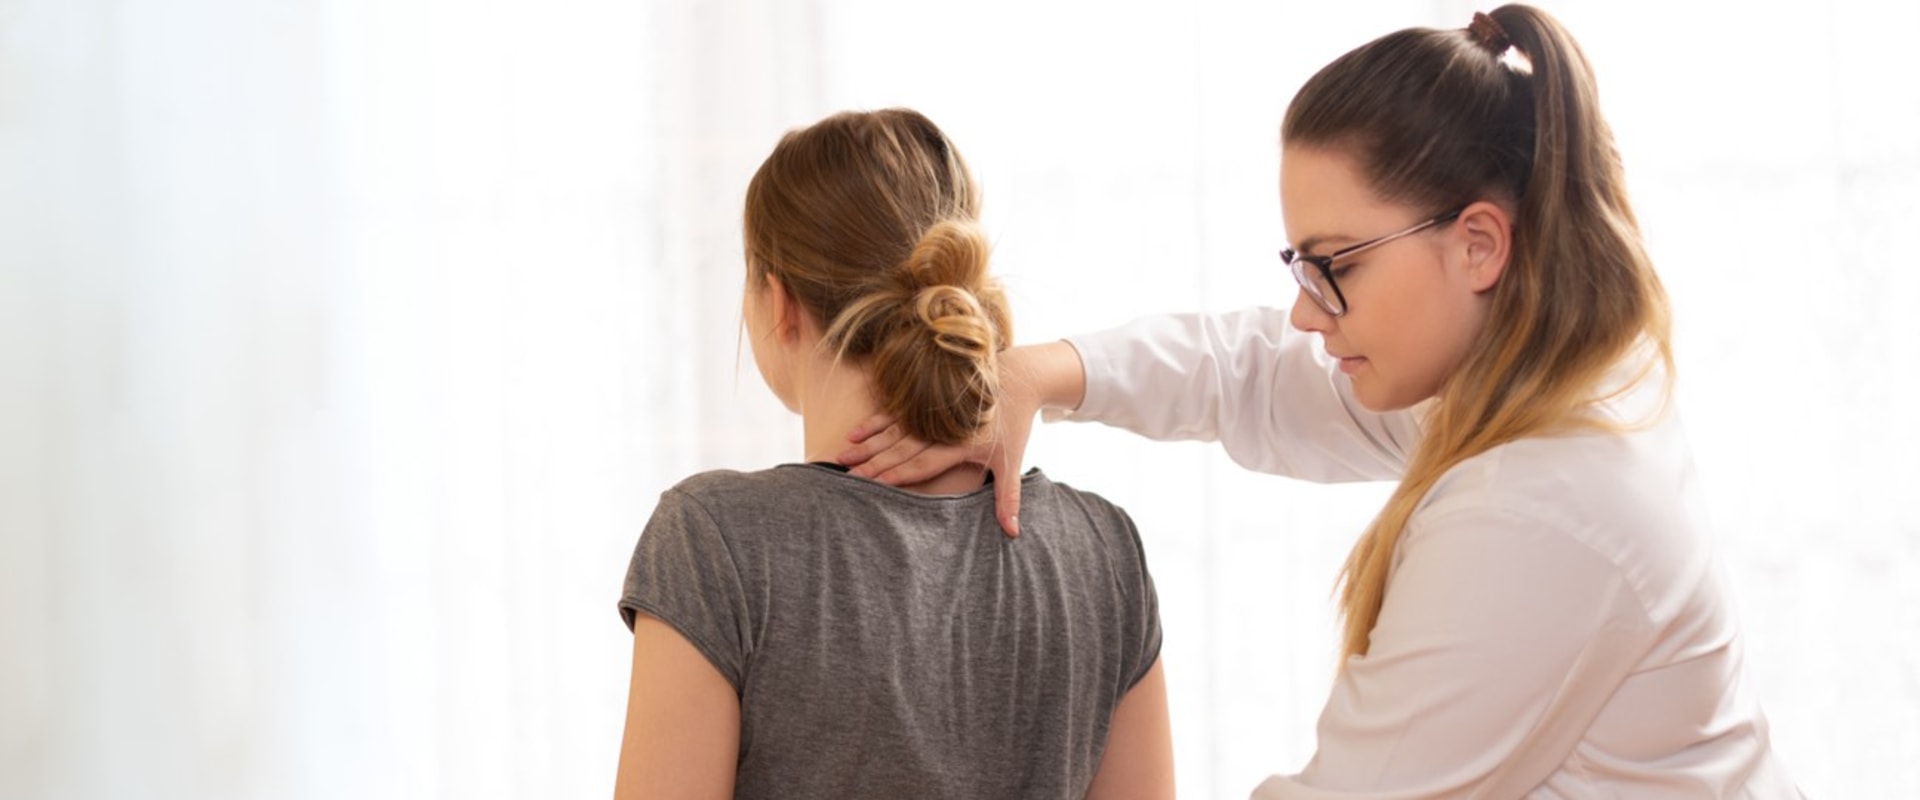 Should i go to chiropractor after injury?